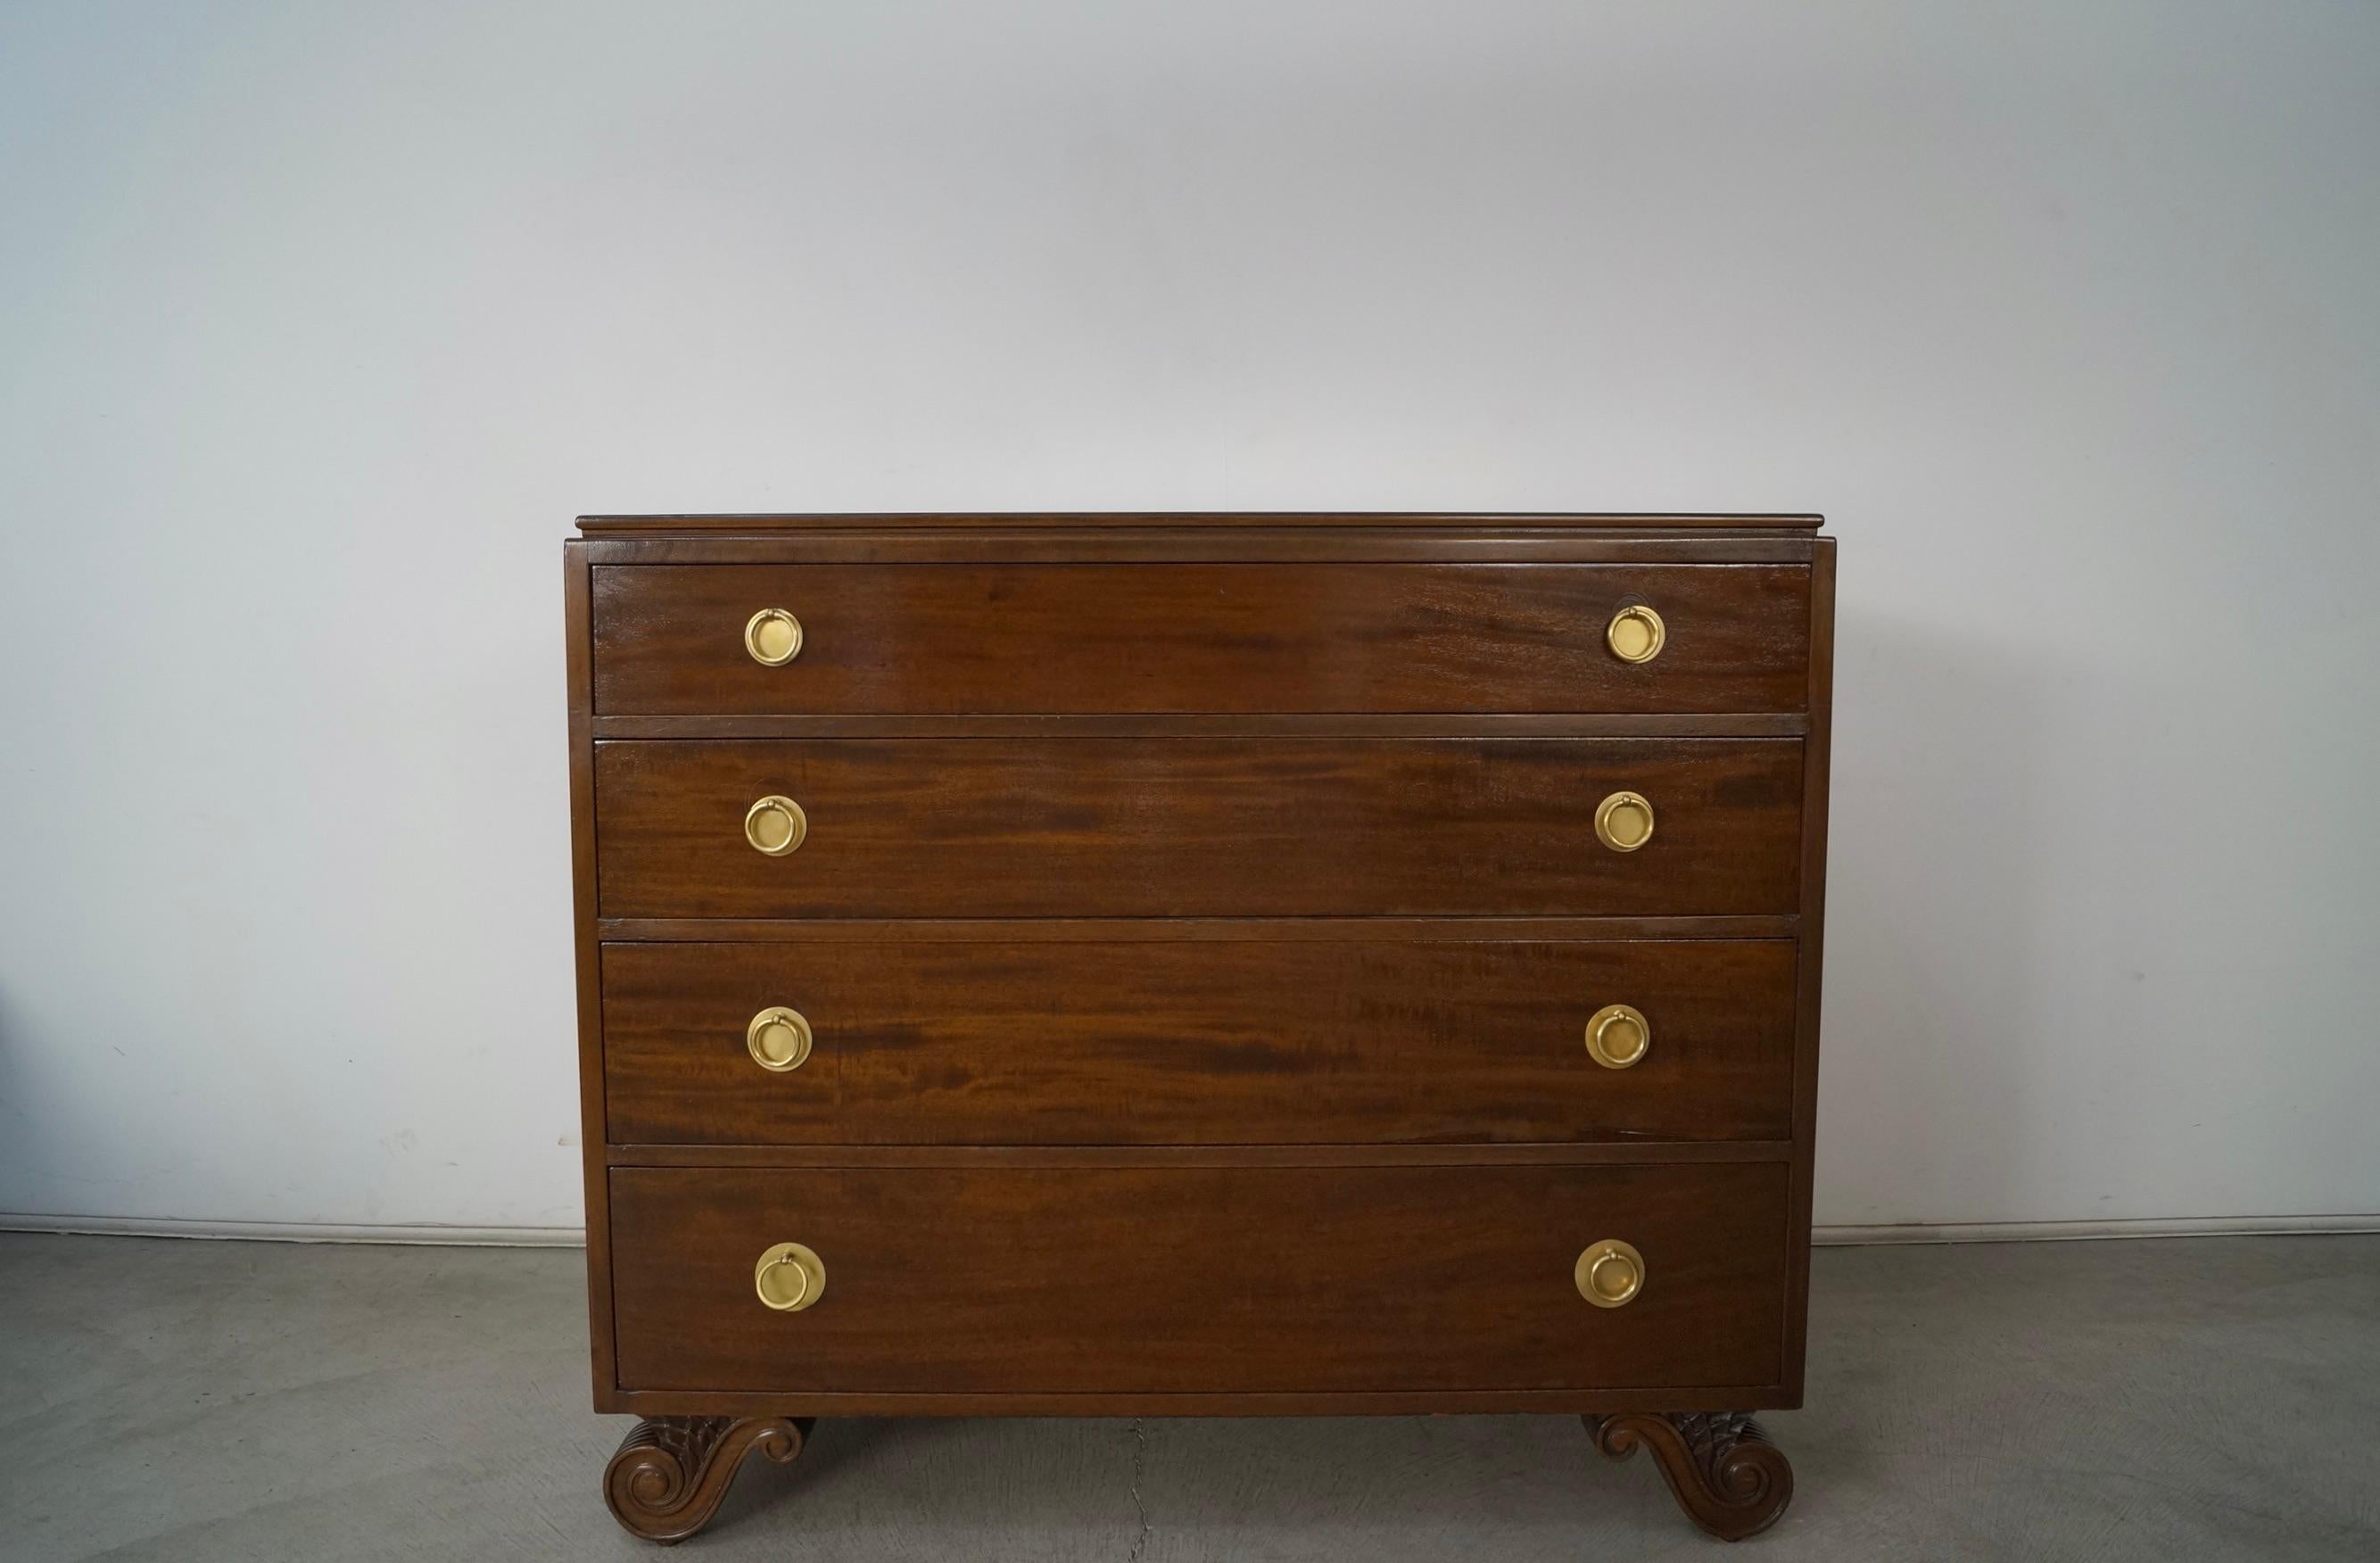 Antique 1920s / 1930s dresser for sale. A very beautiful dresser that has stood the test of time, and manufactured by Johnson Furniture. It's made of mahogany is a dark walnut finish, and has solid brass pulls with solid brass backdrop plates that